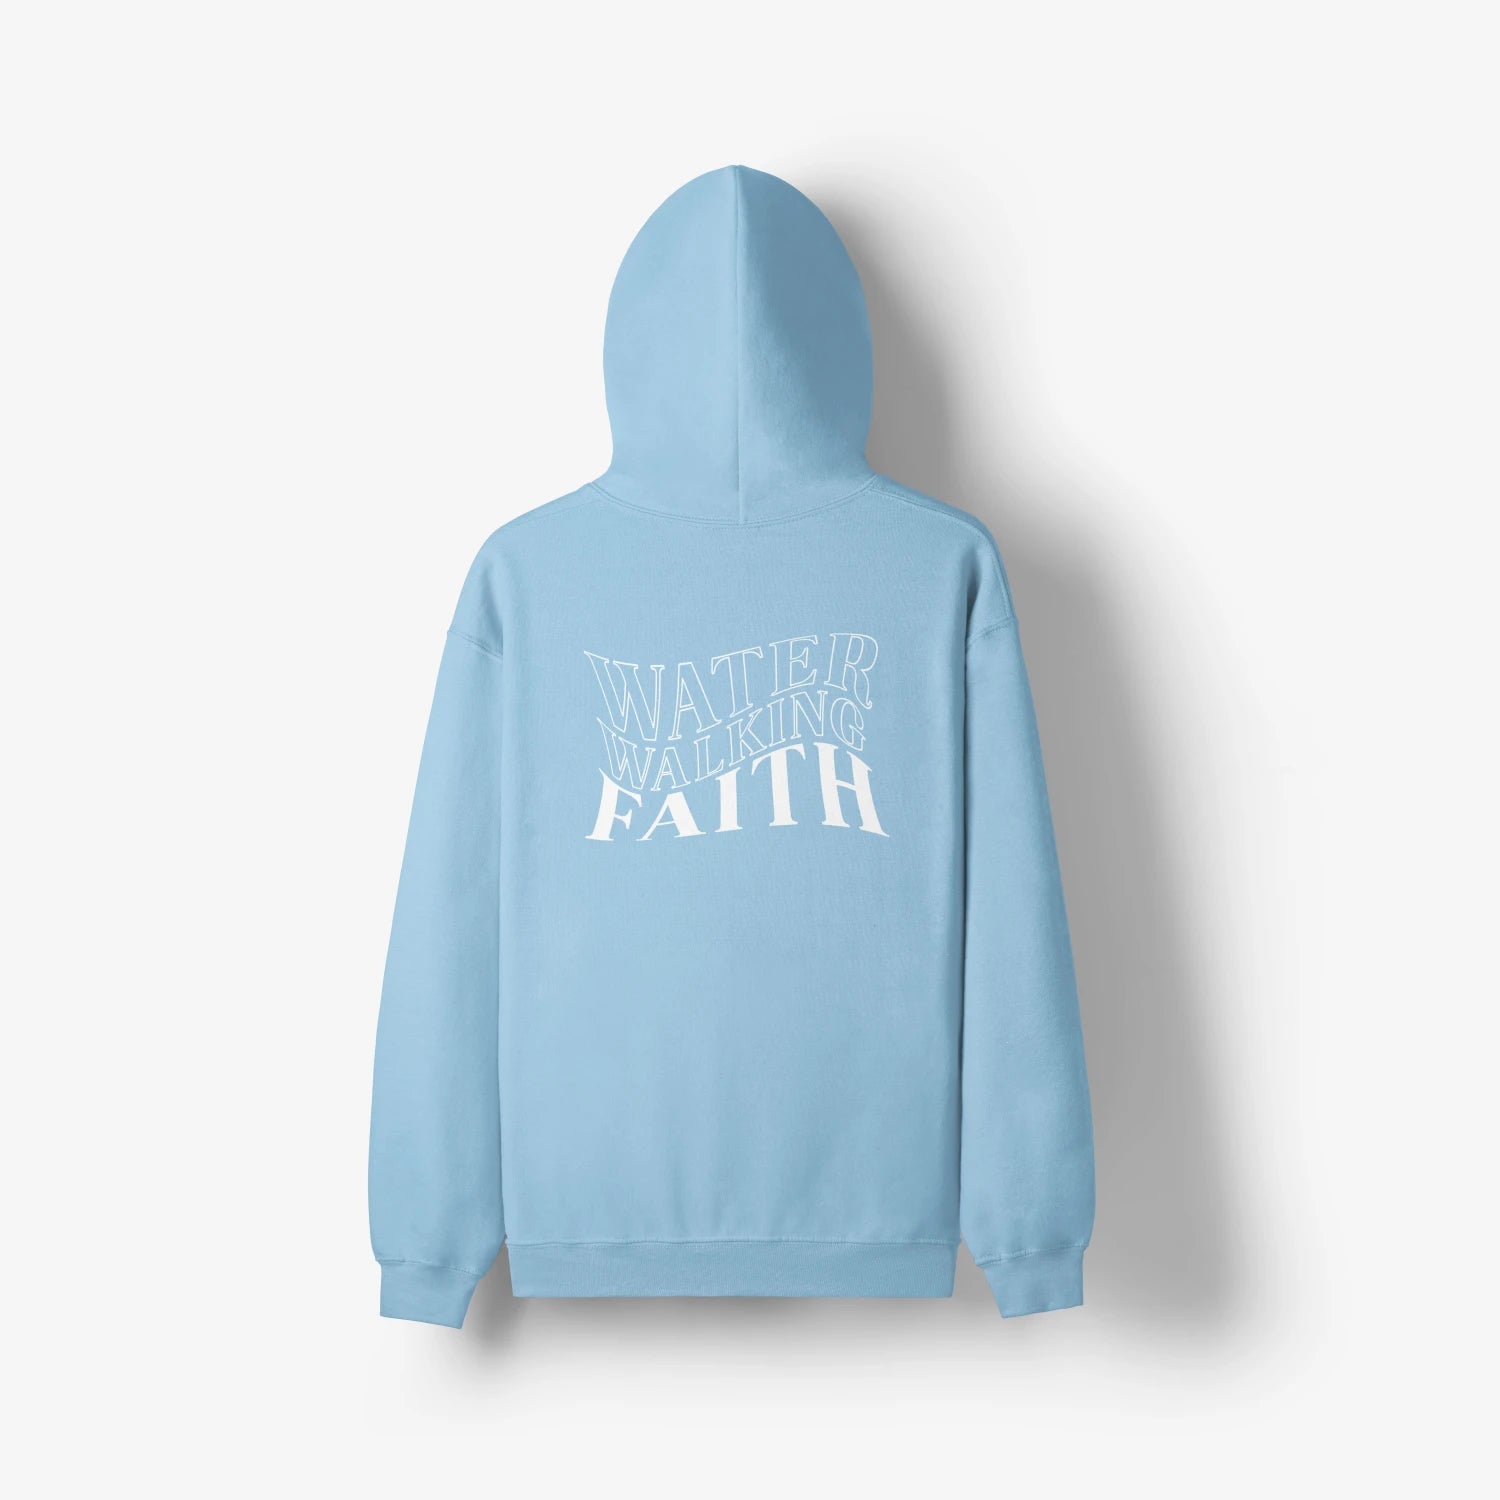 A Water Walking Faith Hoodie with white text on it by Be Still and Know.